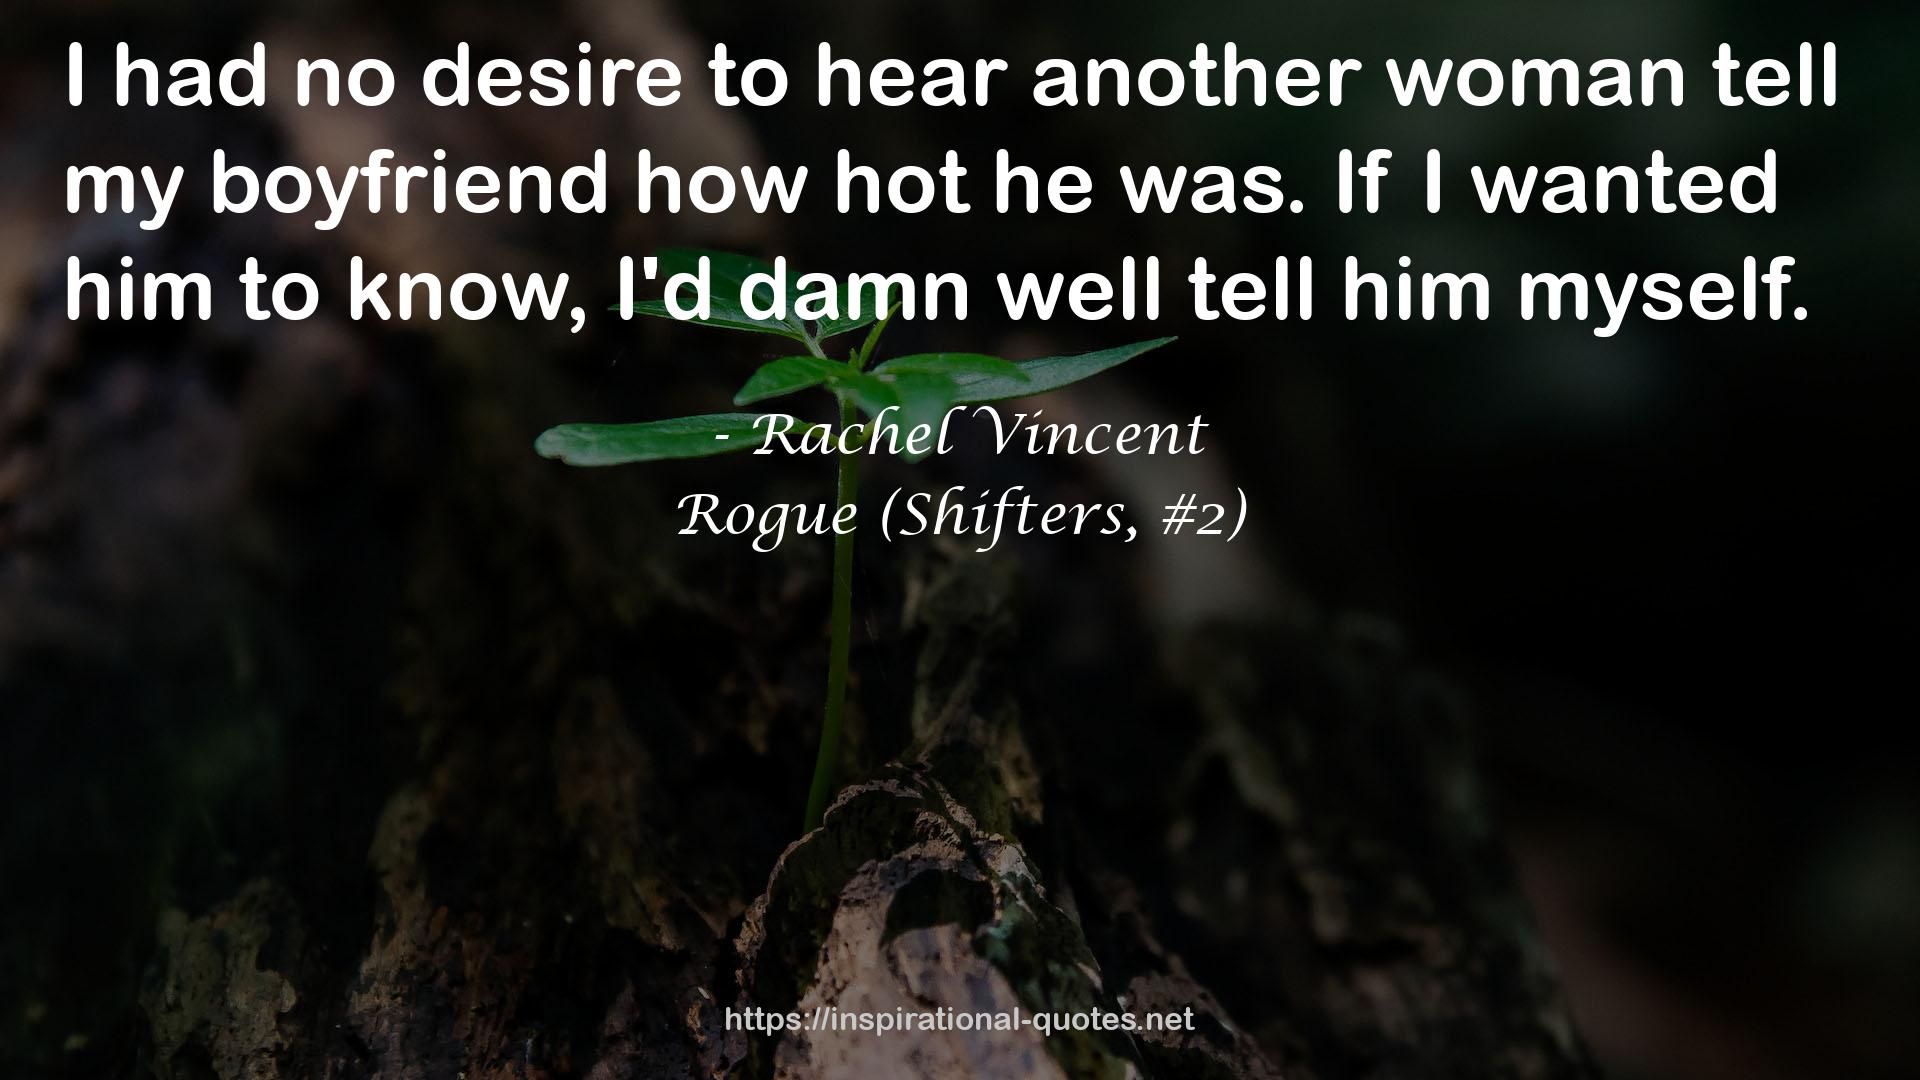 Rogue (Shifters, #2) QUOTES